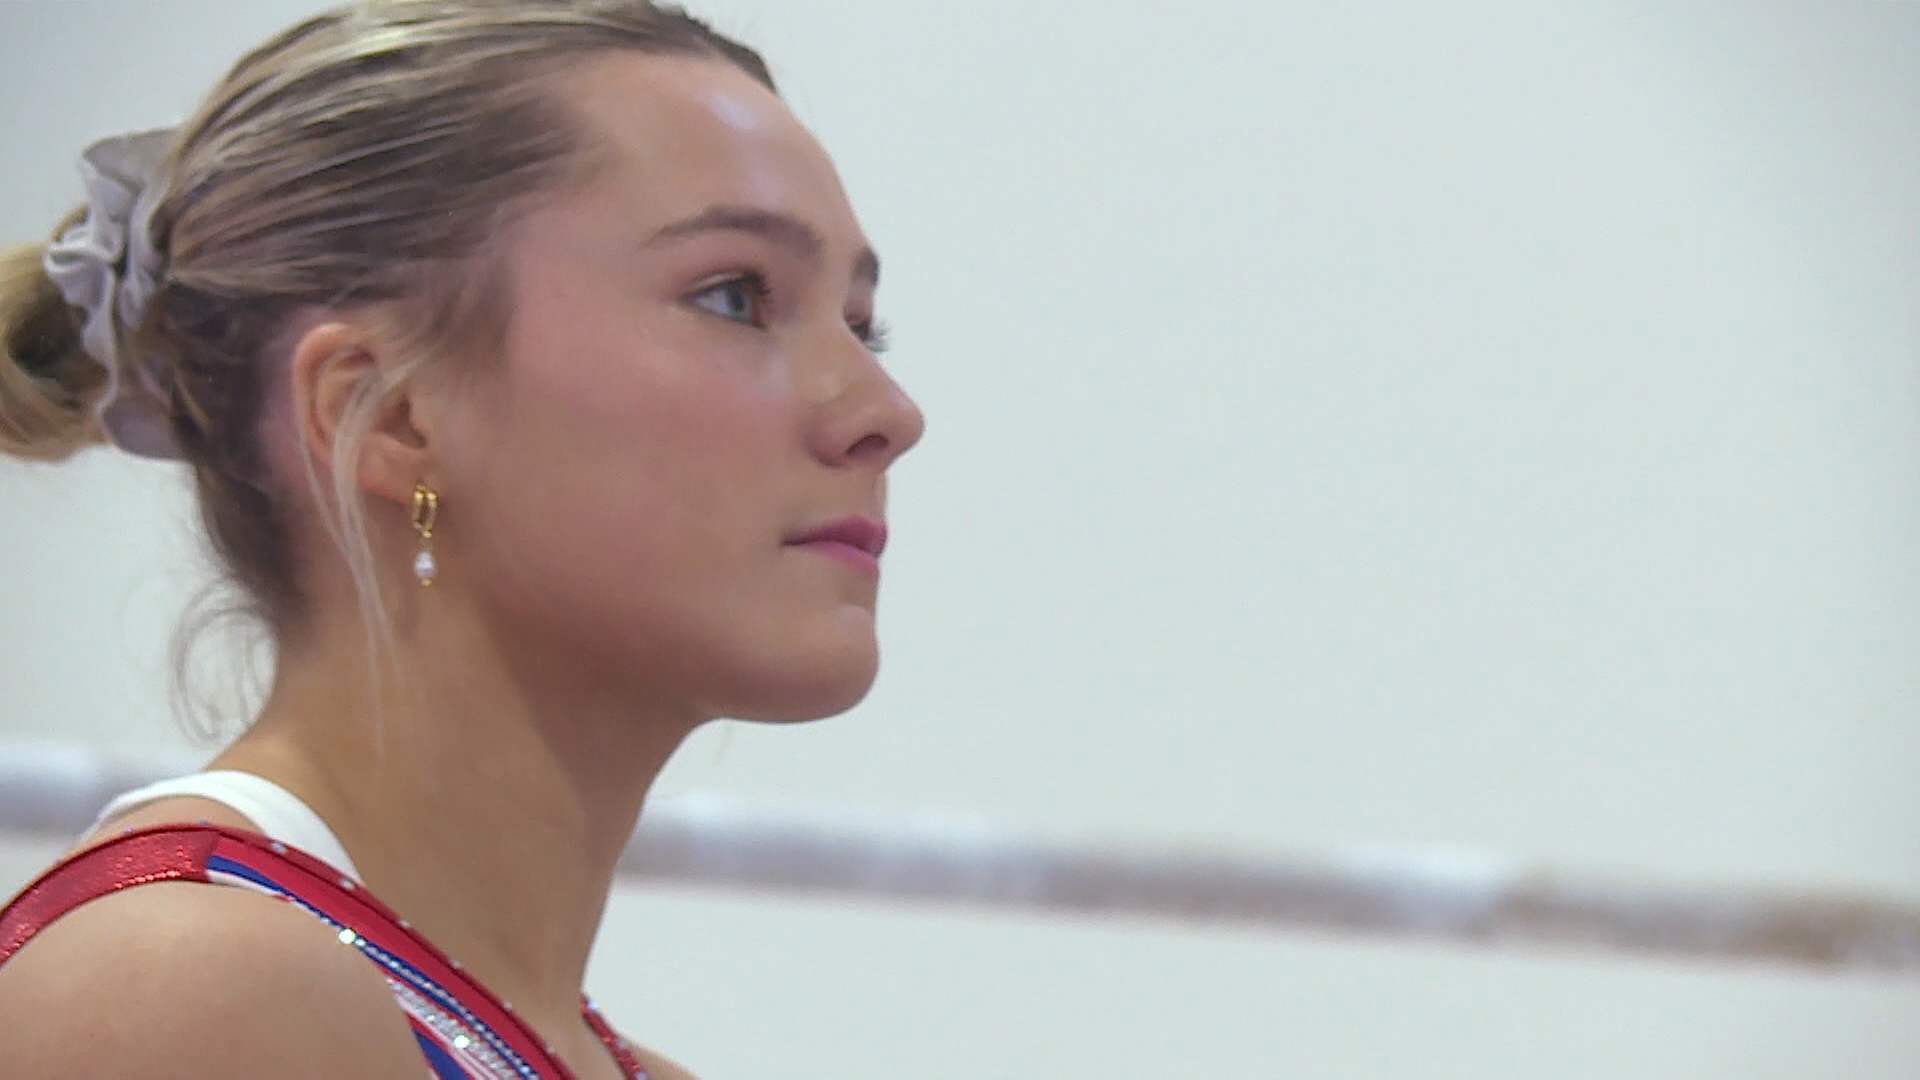 An 18-year-old made one of the biggest sacrifices she could to pursue her gymnastics dream.